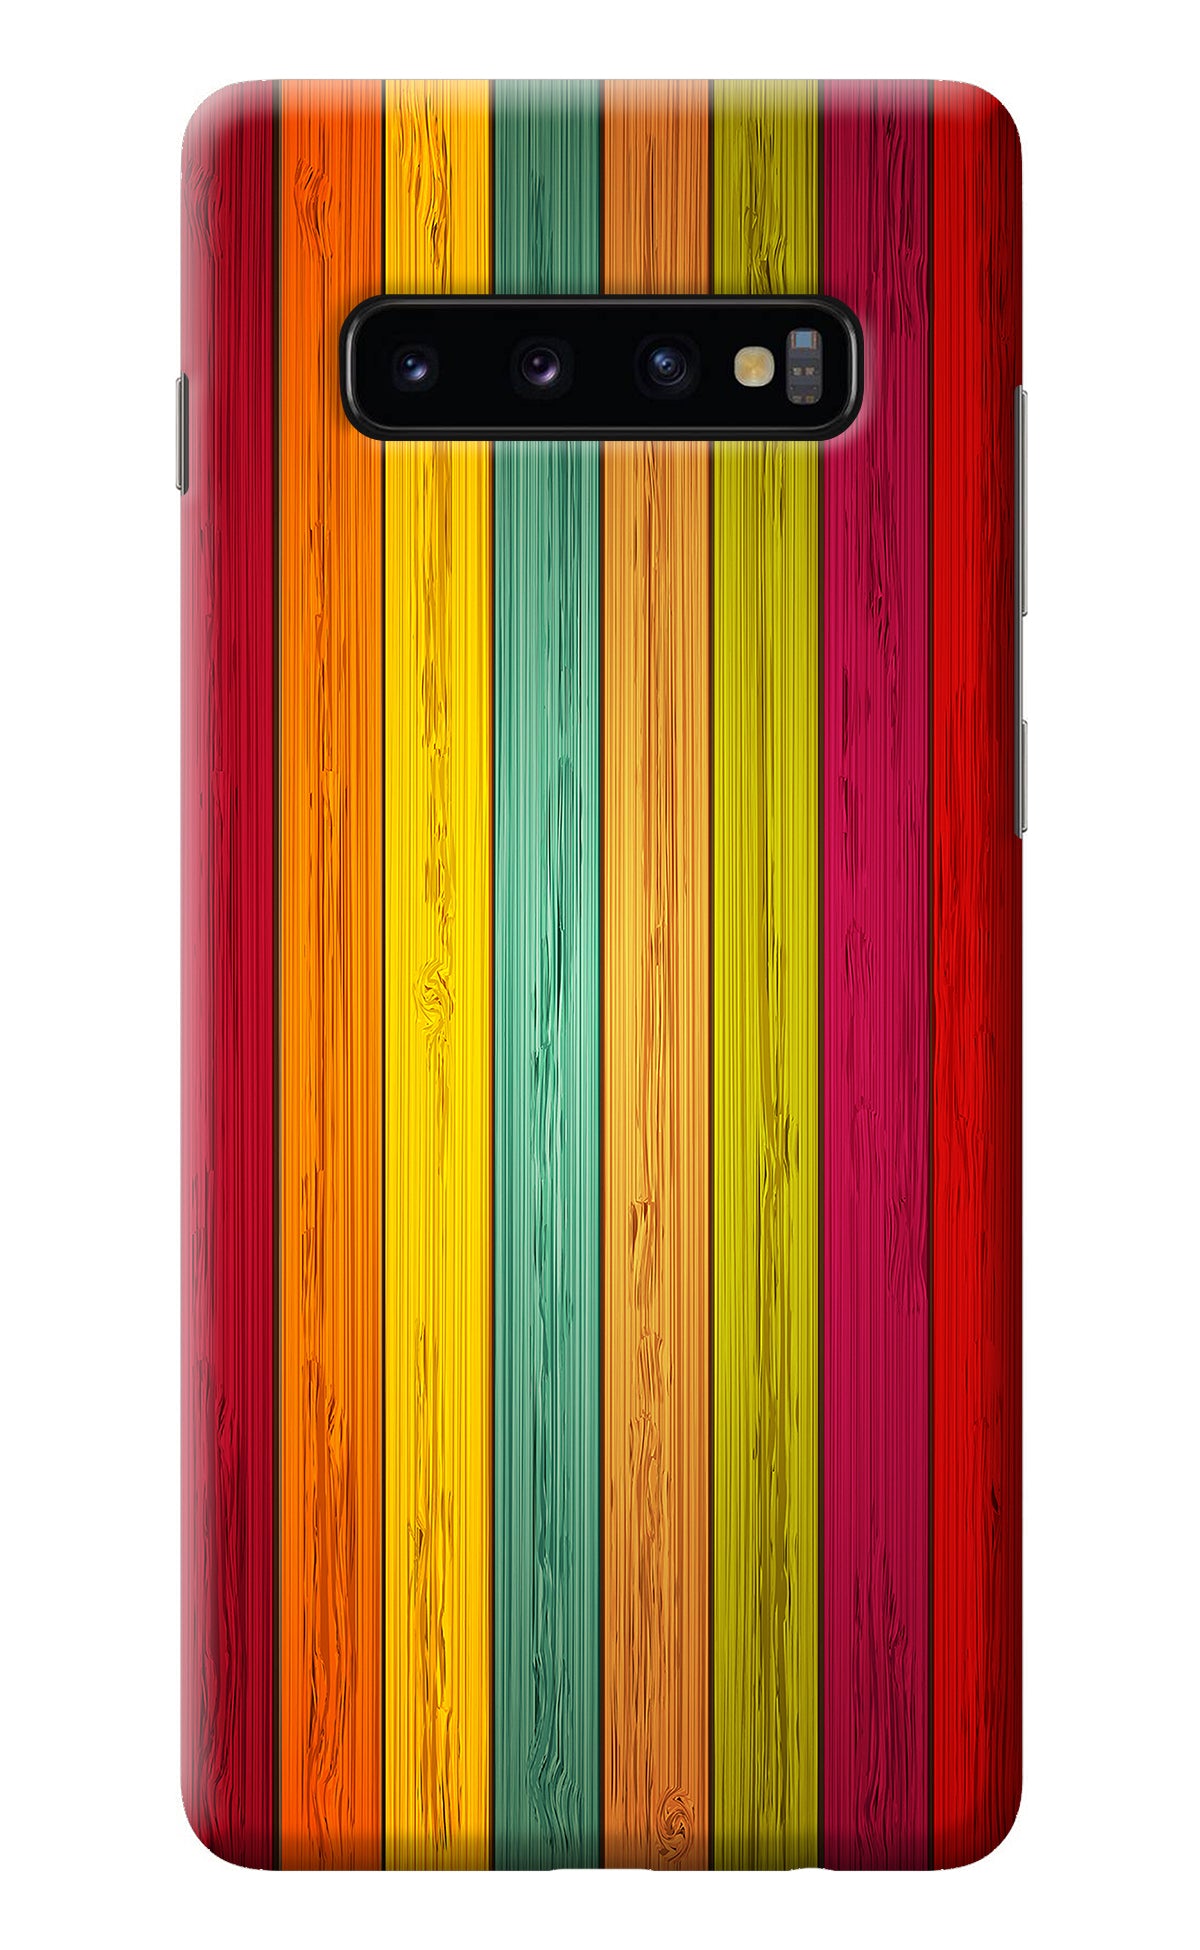 Multicolor Wooden Samsung S10 Plus Back Cover